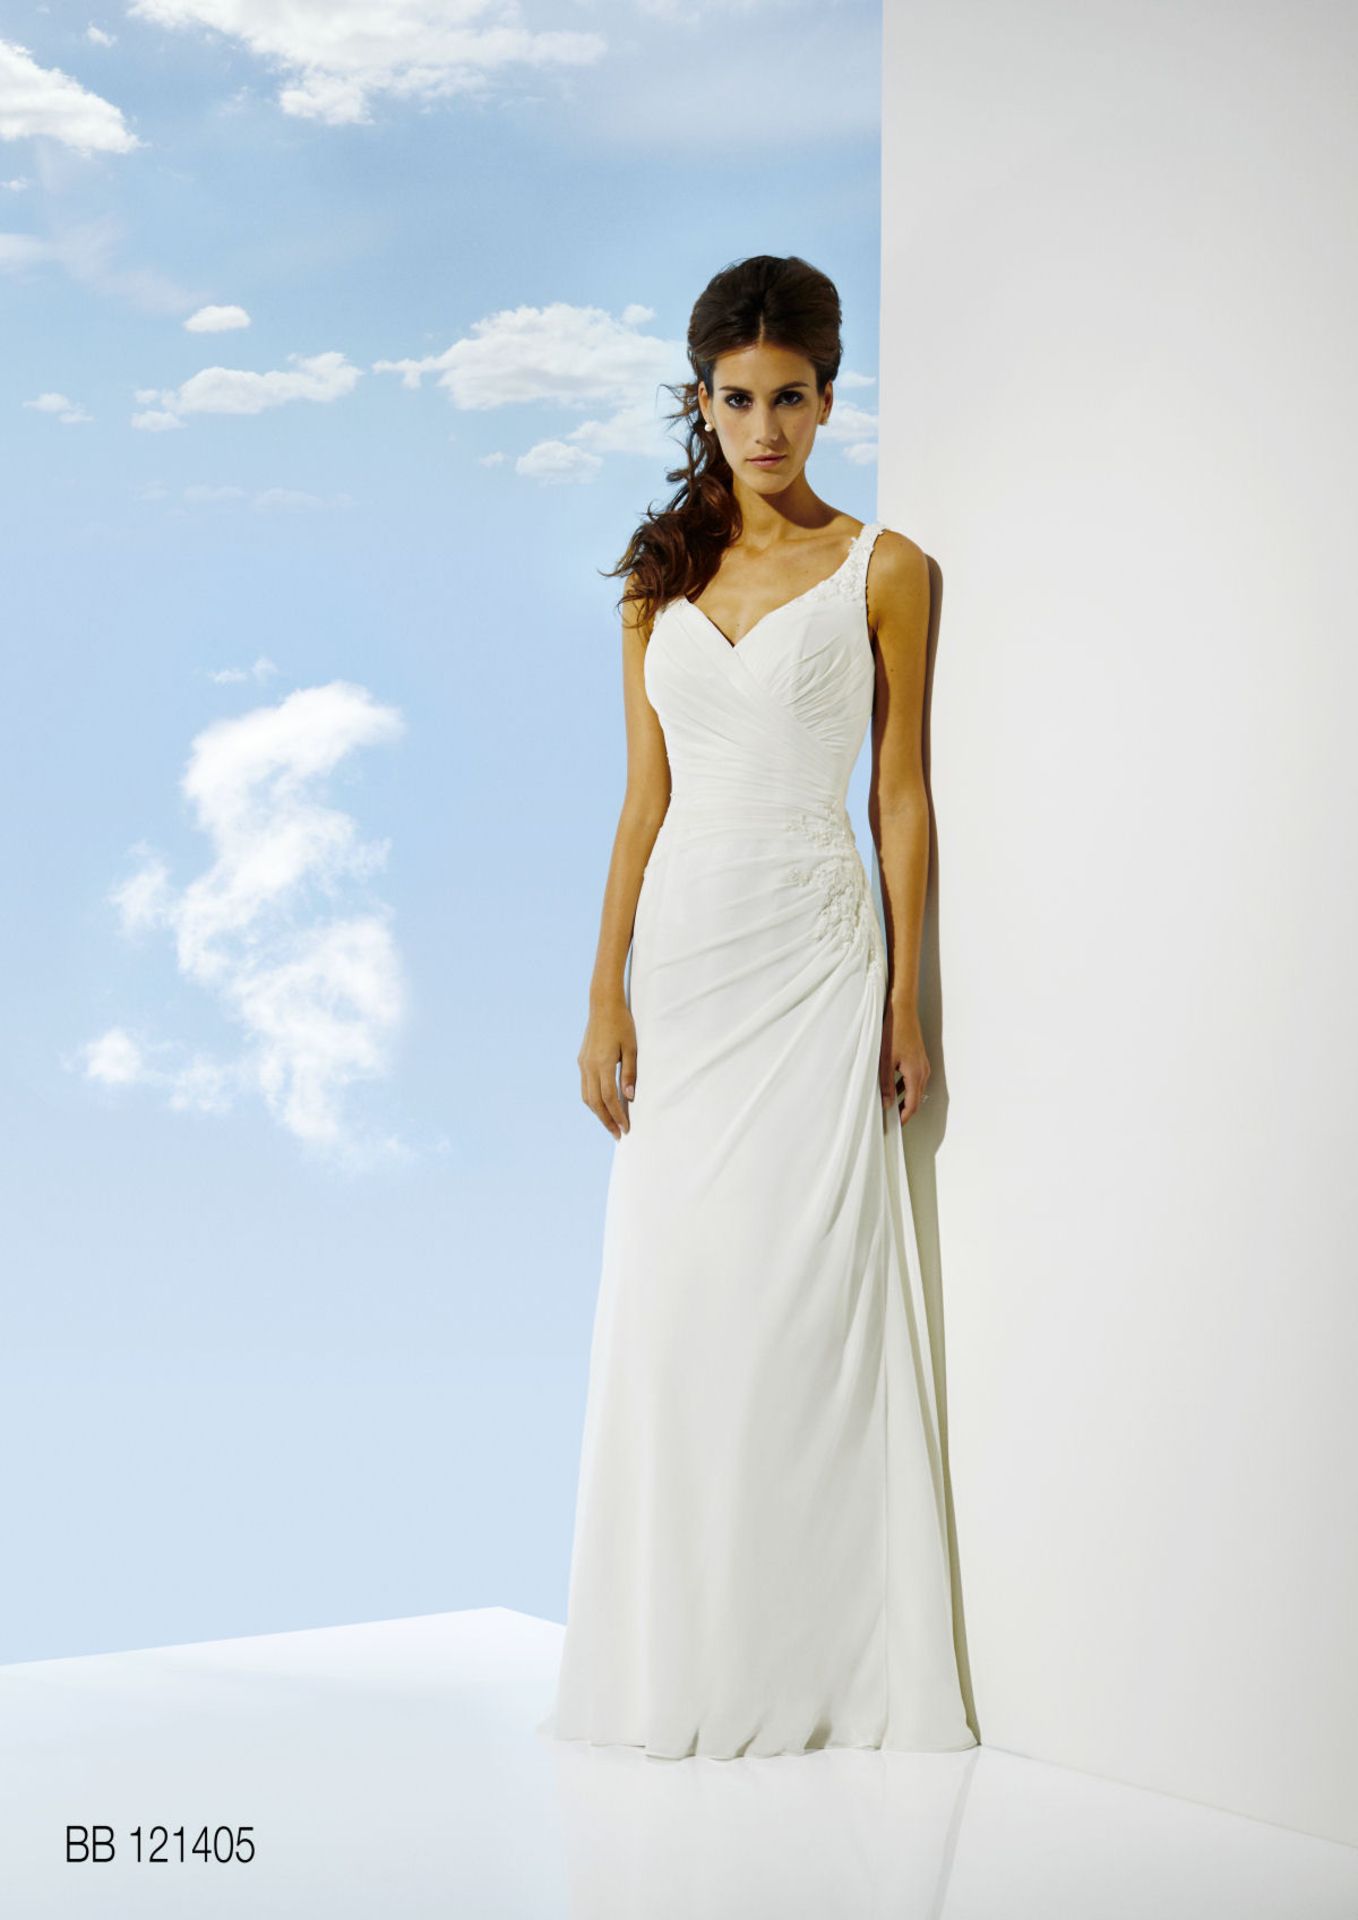 220+ Full Length Bridal Gowns. Total Estimated RRP£250,000. - Image 4 of 6